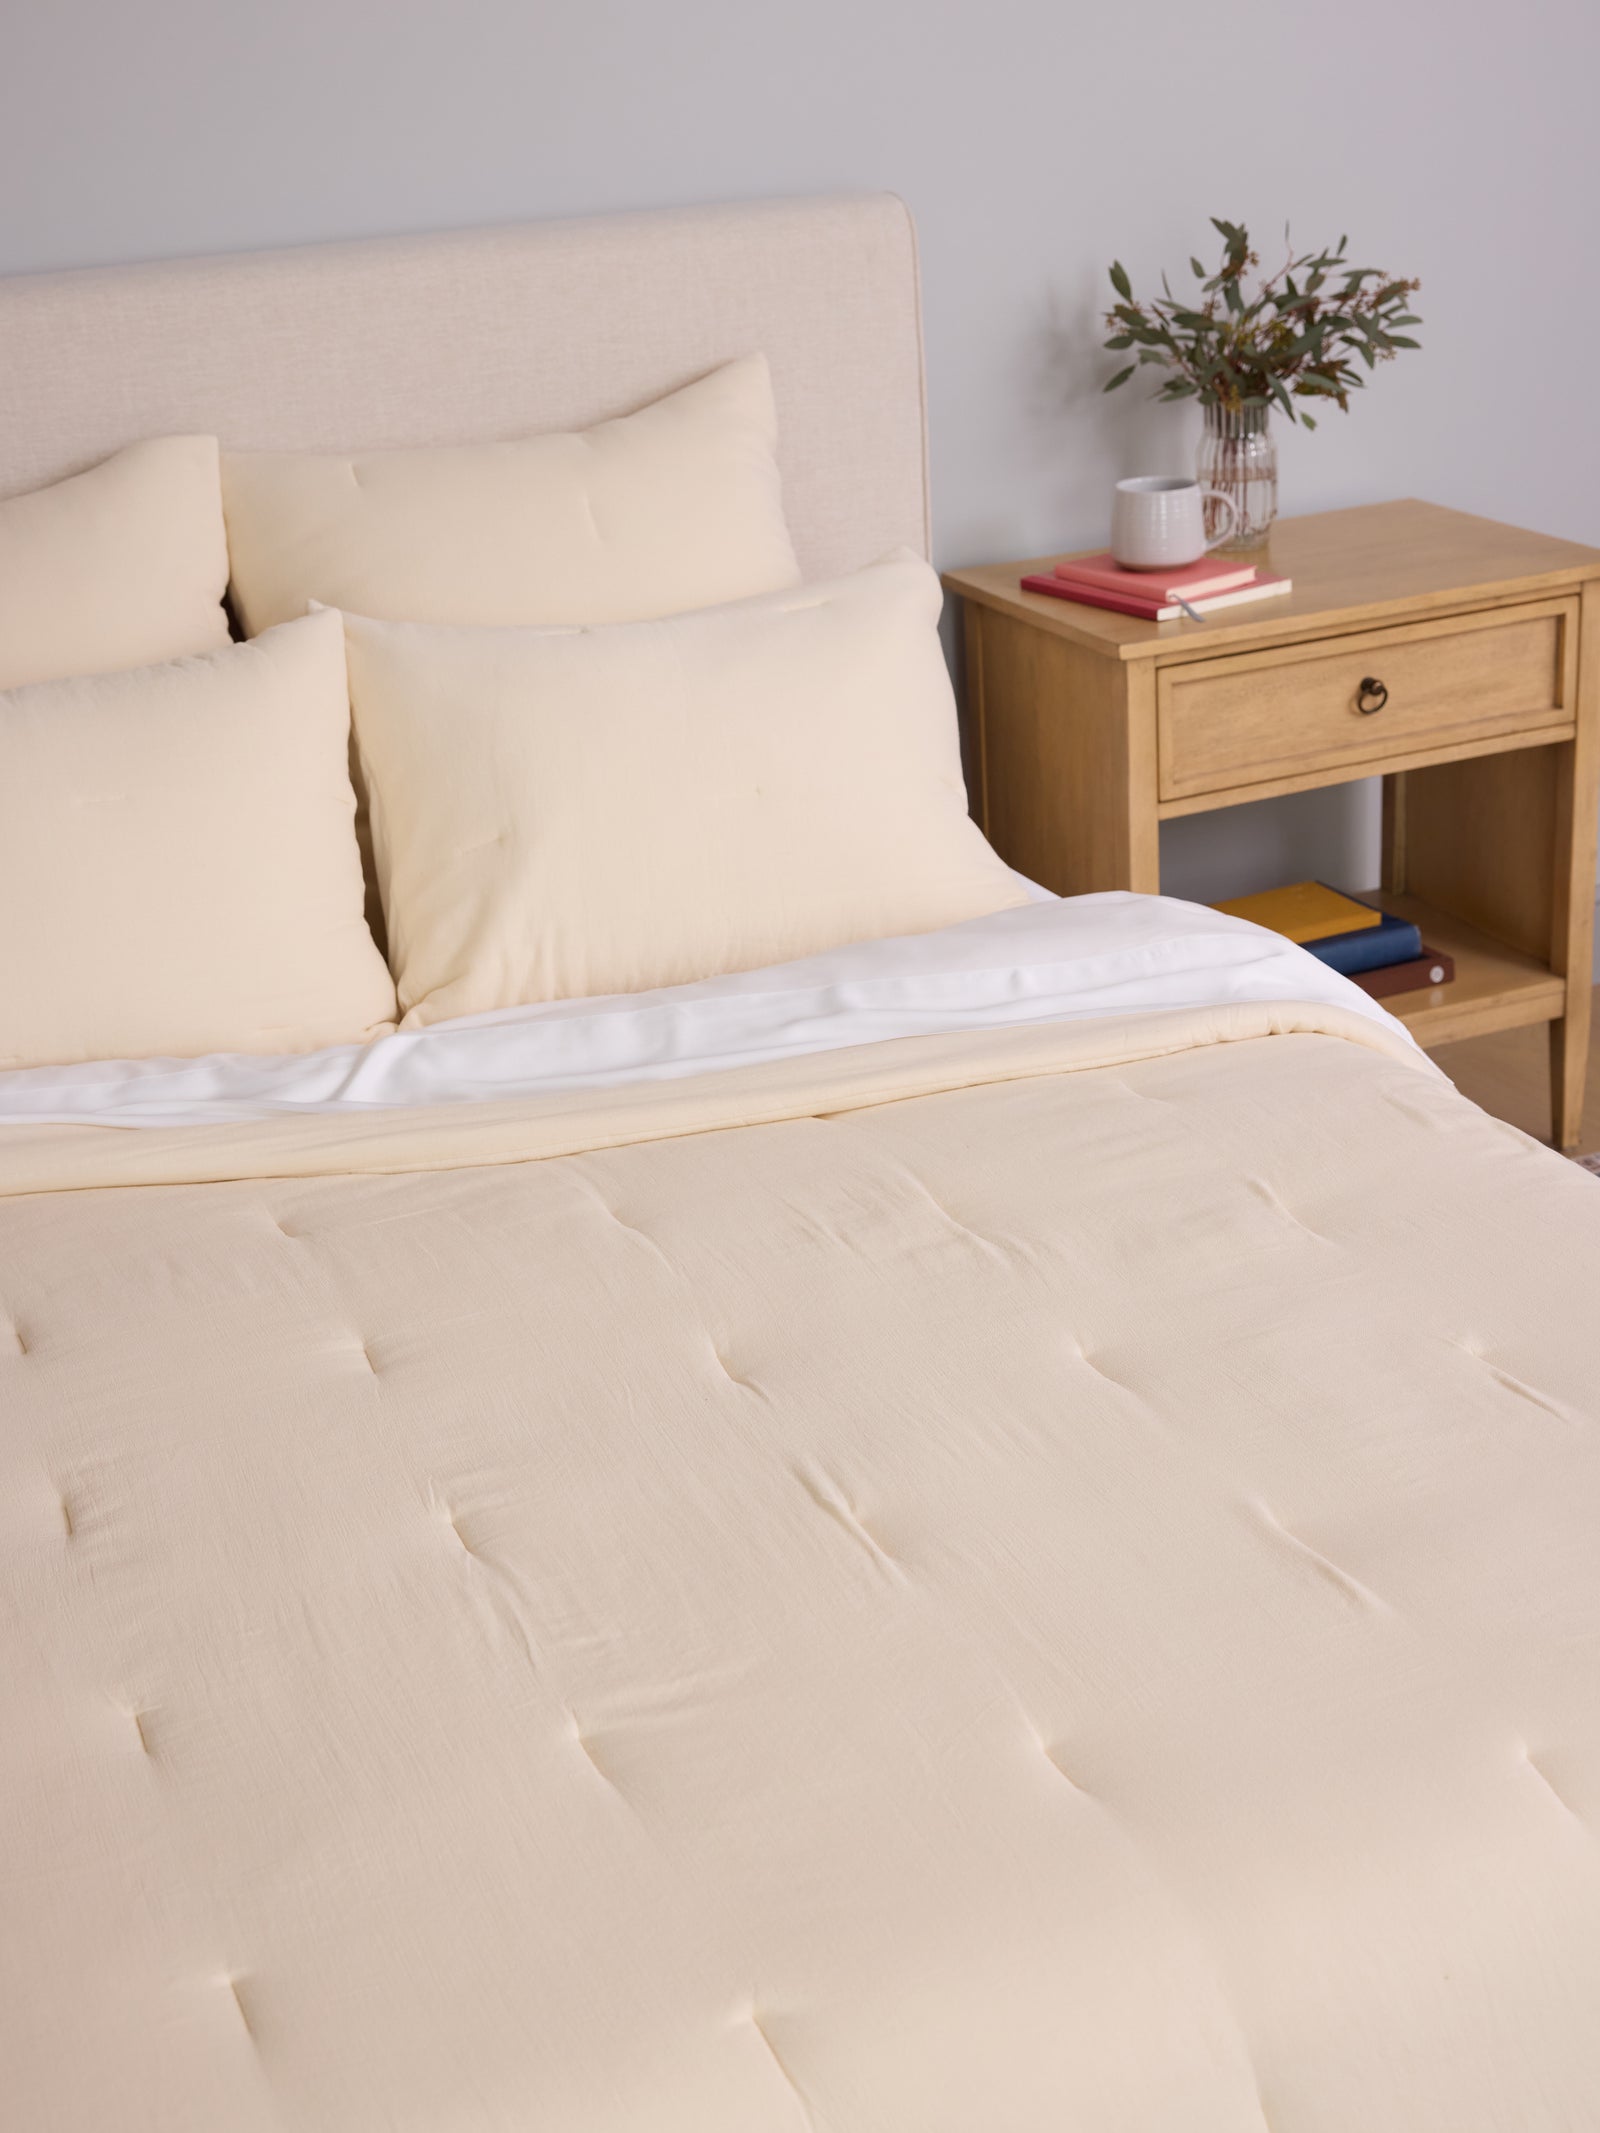 Buttermilk Aire Bamboo Puckered Quilt. The Quilt has been photographed while on a bed in a home bedroom.